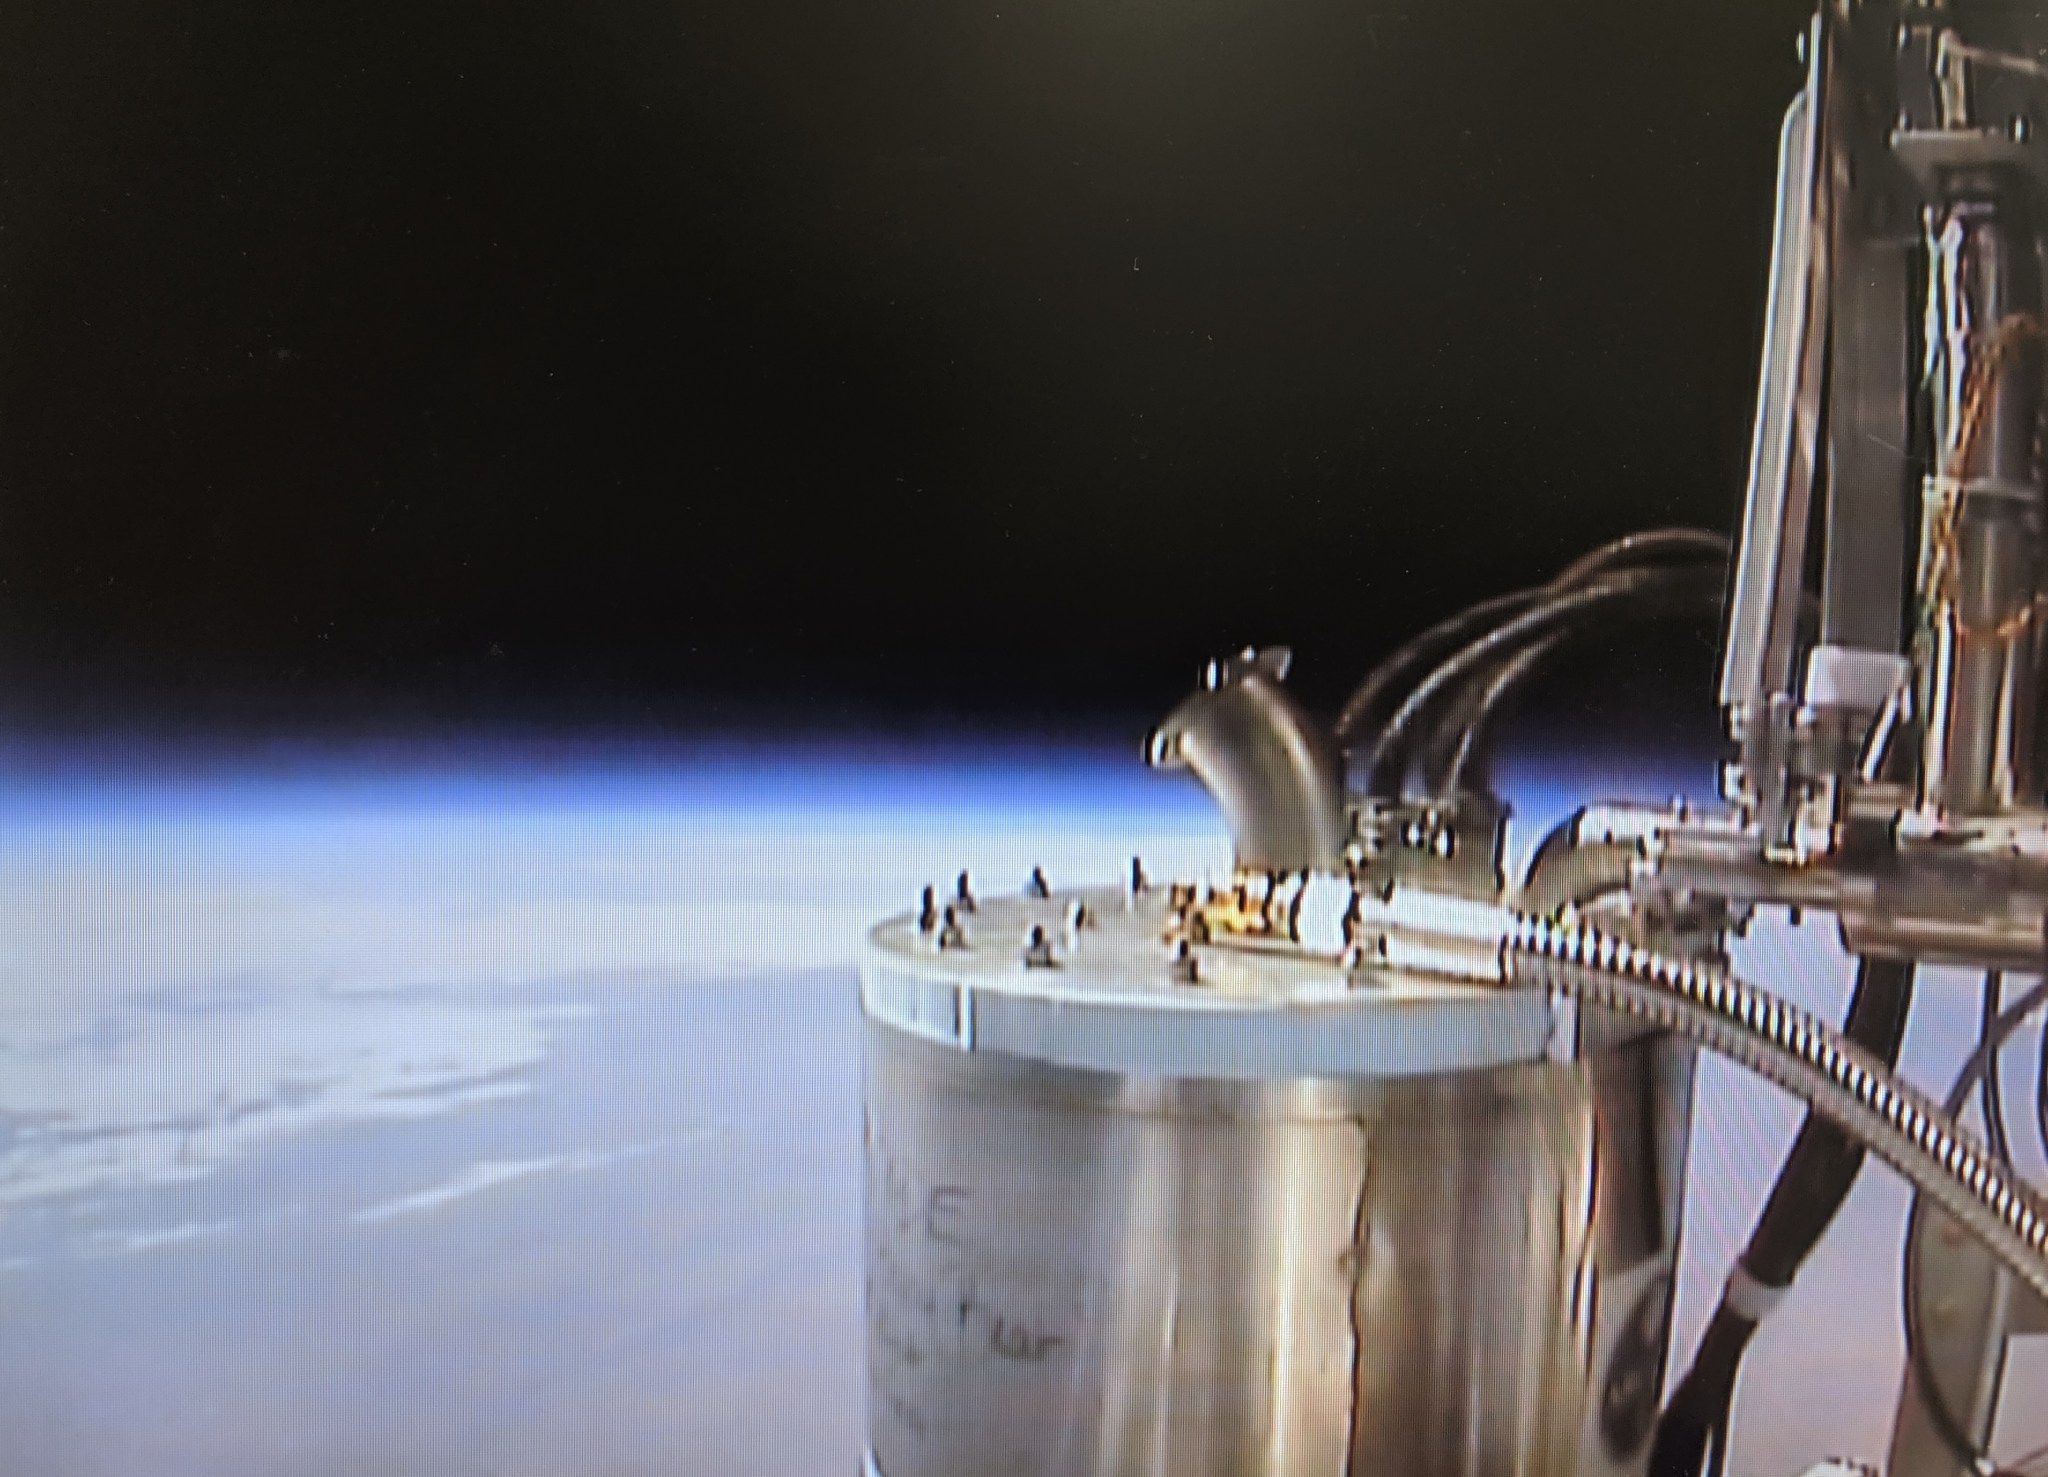 This image shows BOBCAT hardware used to demonstrate the successful transfer of cryogenic fluids into a dewar on a balloon demo.